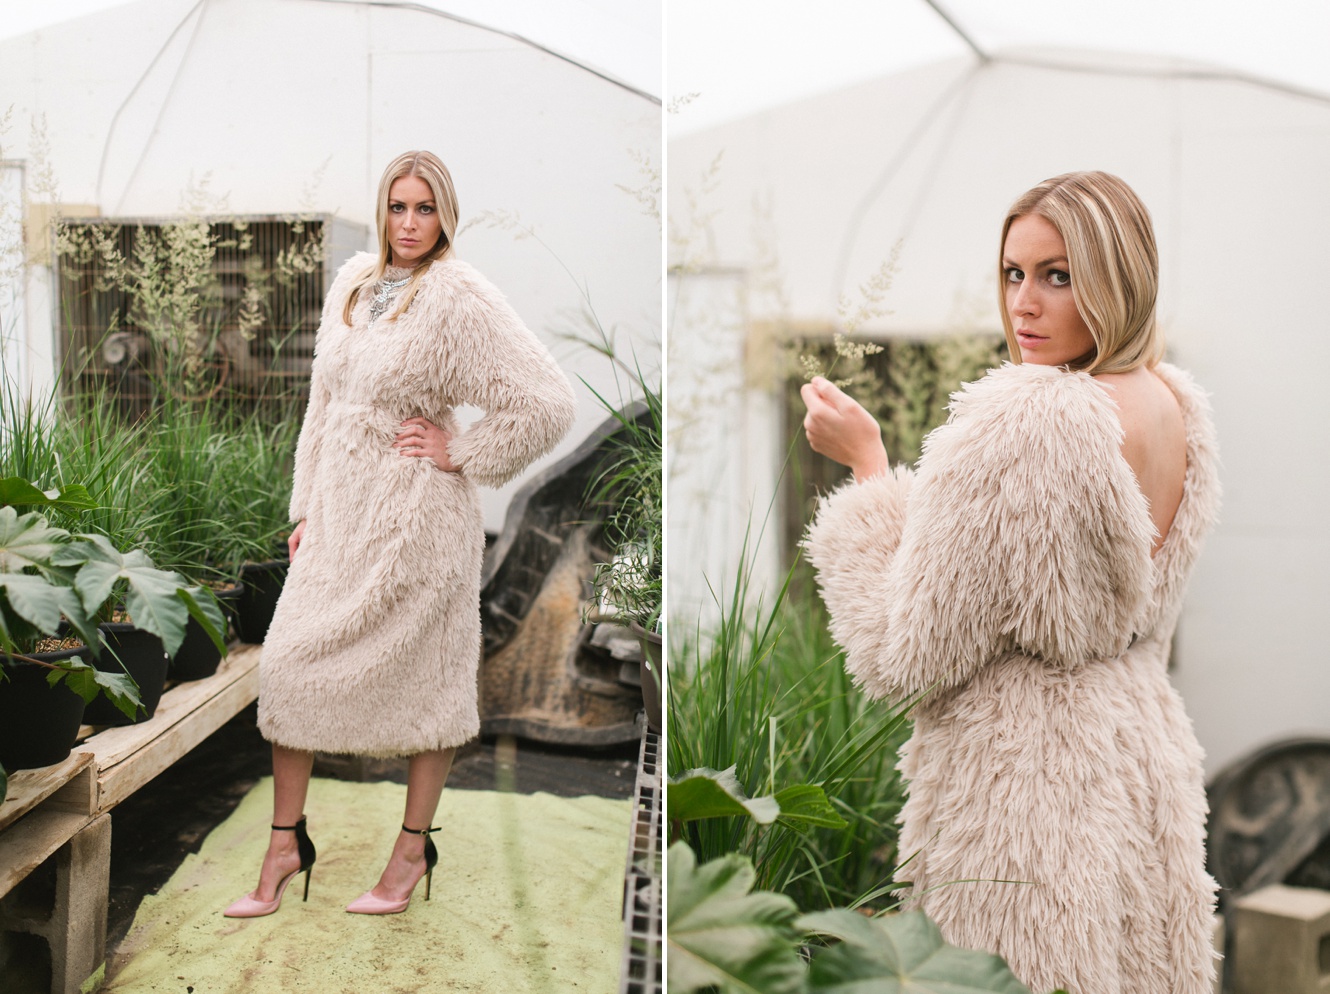 wool jacket editorial fashion photo shoot in greenhouse